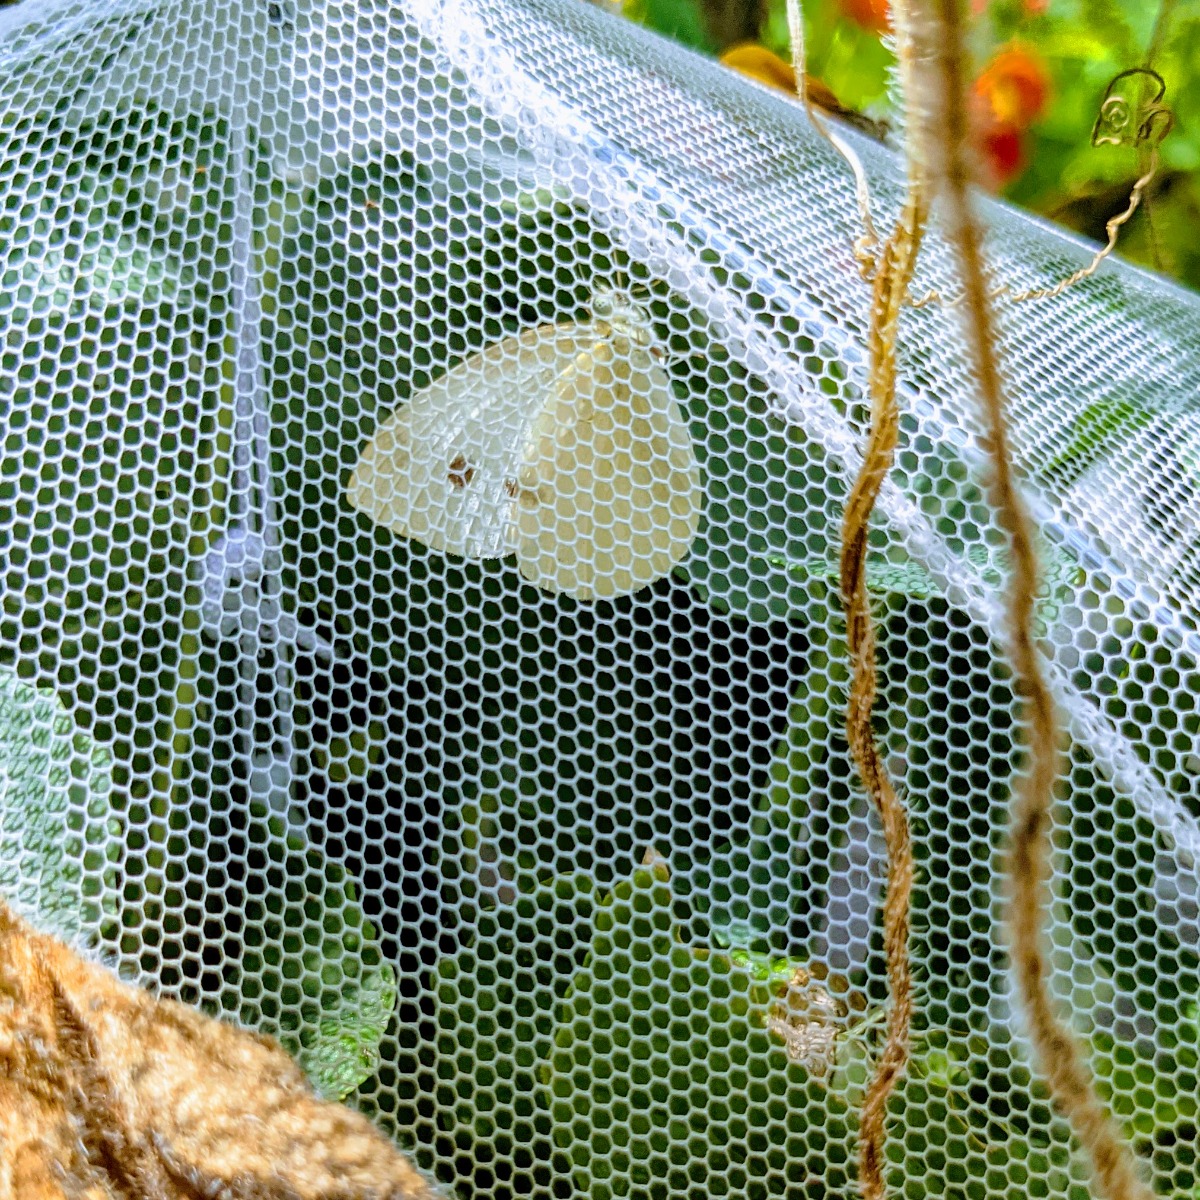 Cabbage Moth inside insect netting with broccolini